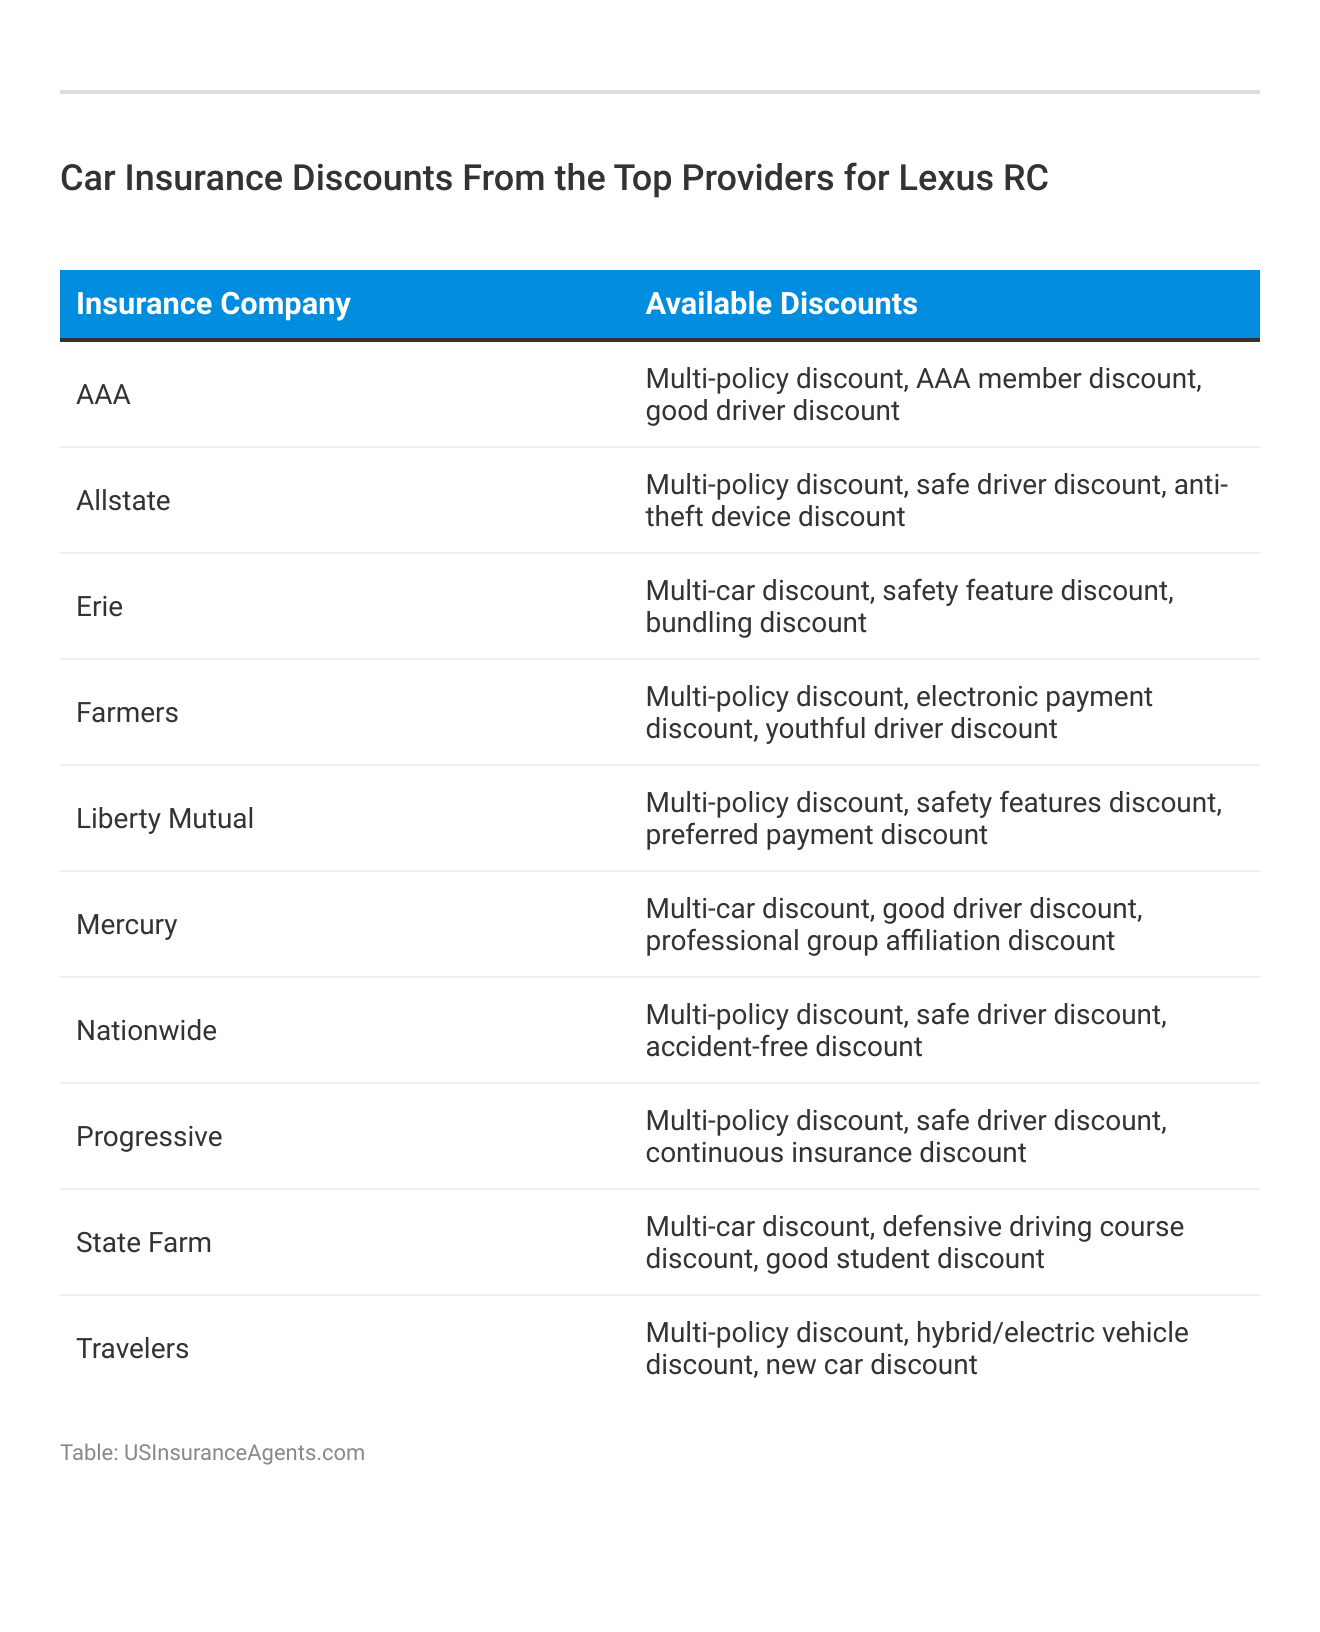 <h3>Car Insurance Discounts From the Top Providers for Lexus RC</h3>